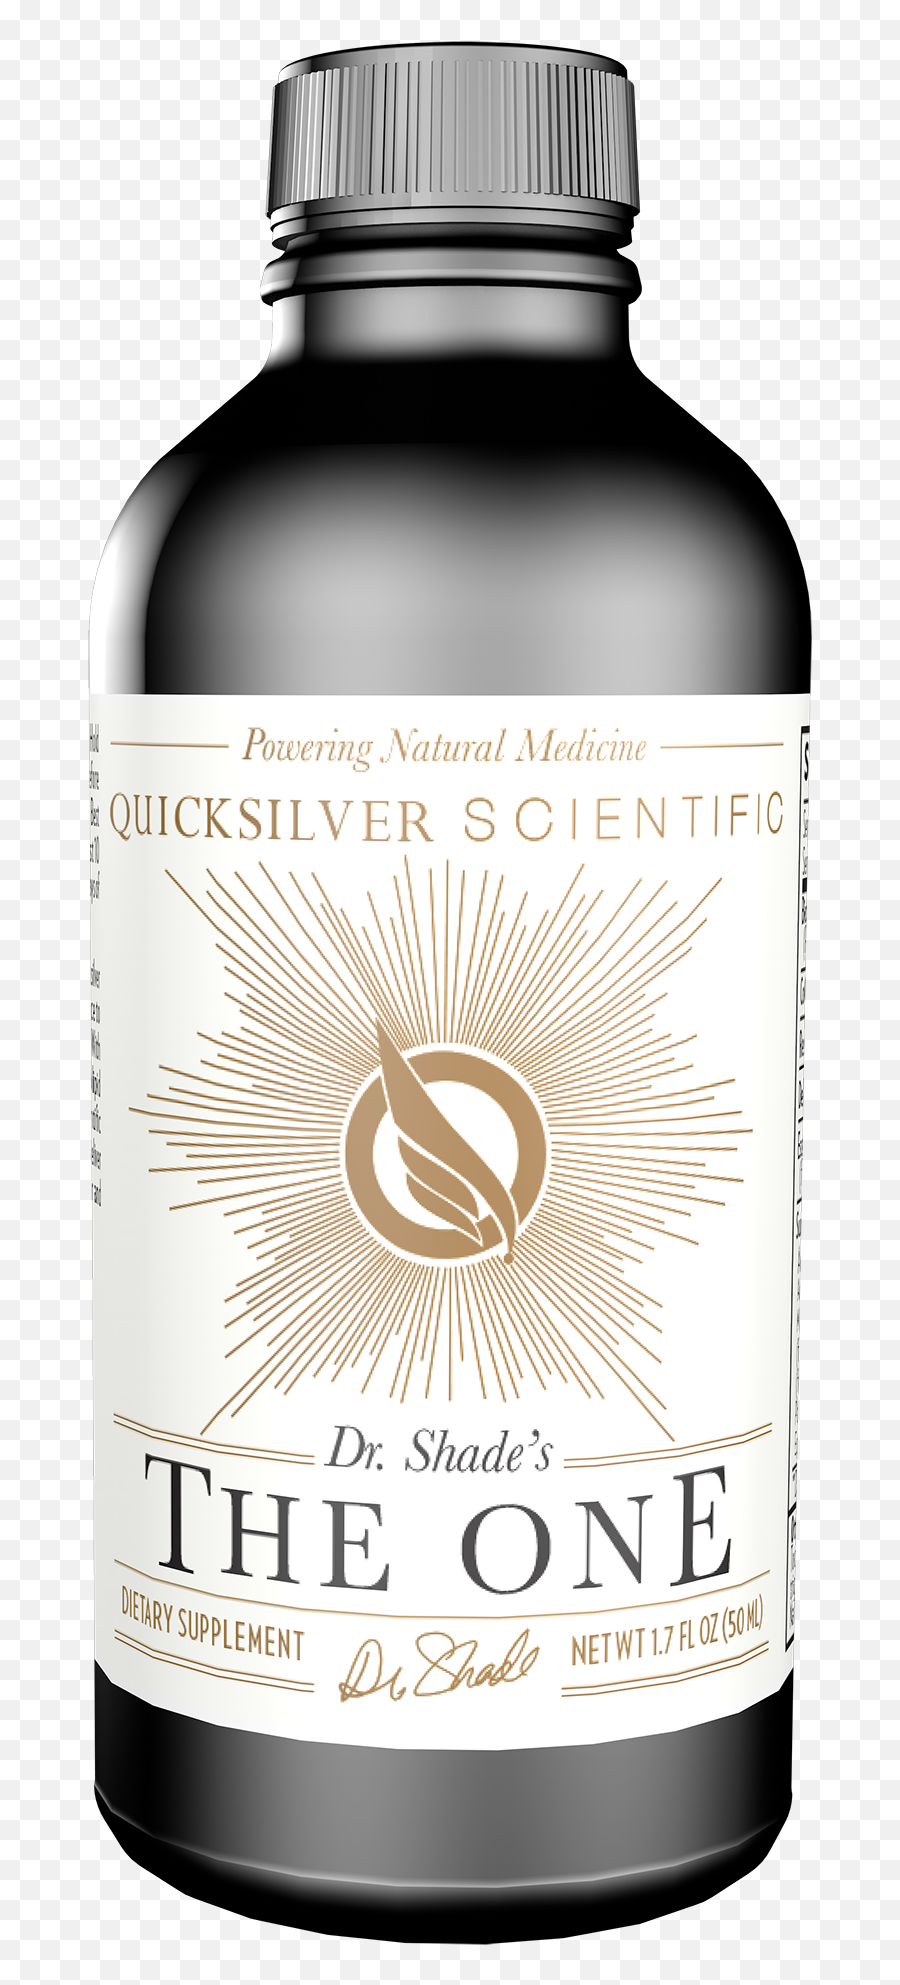 Quicksilver - The One Quicksilver Scientific The One Png,Quicksilver Png